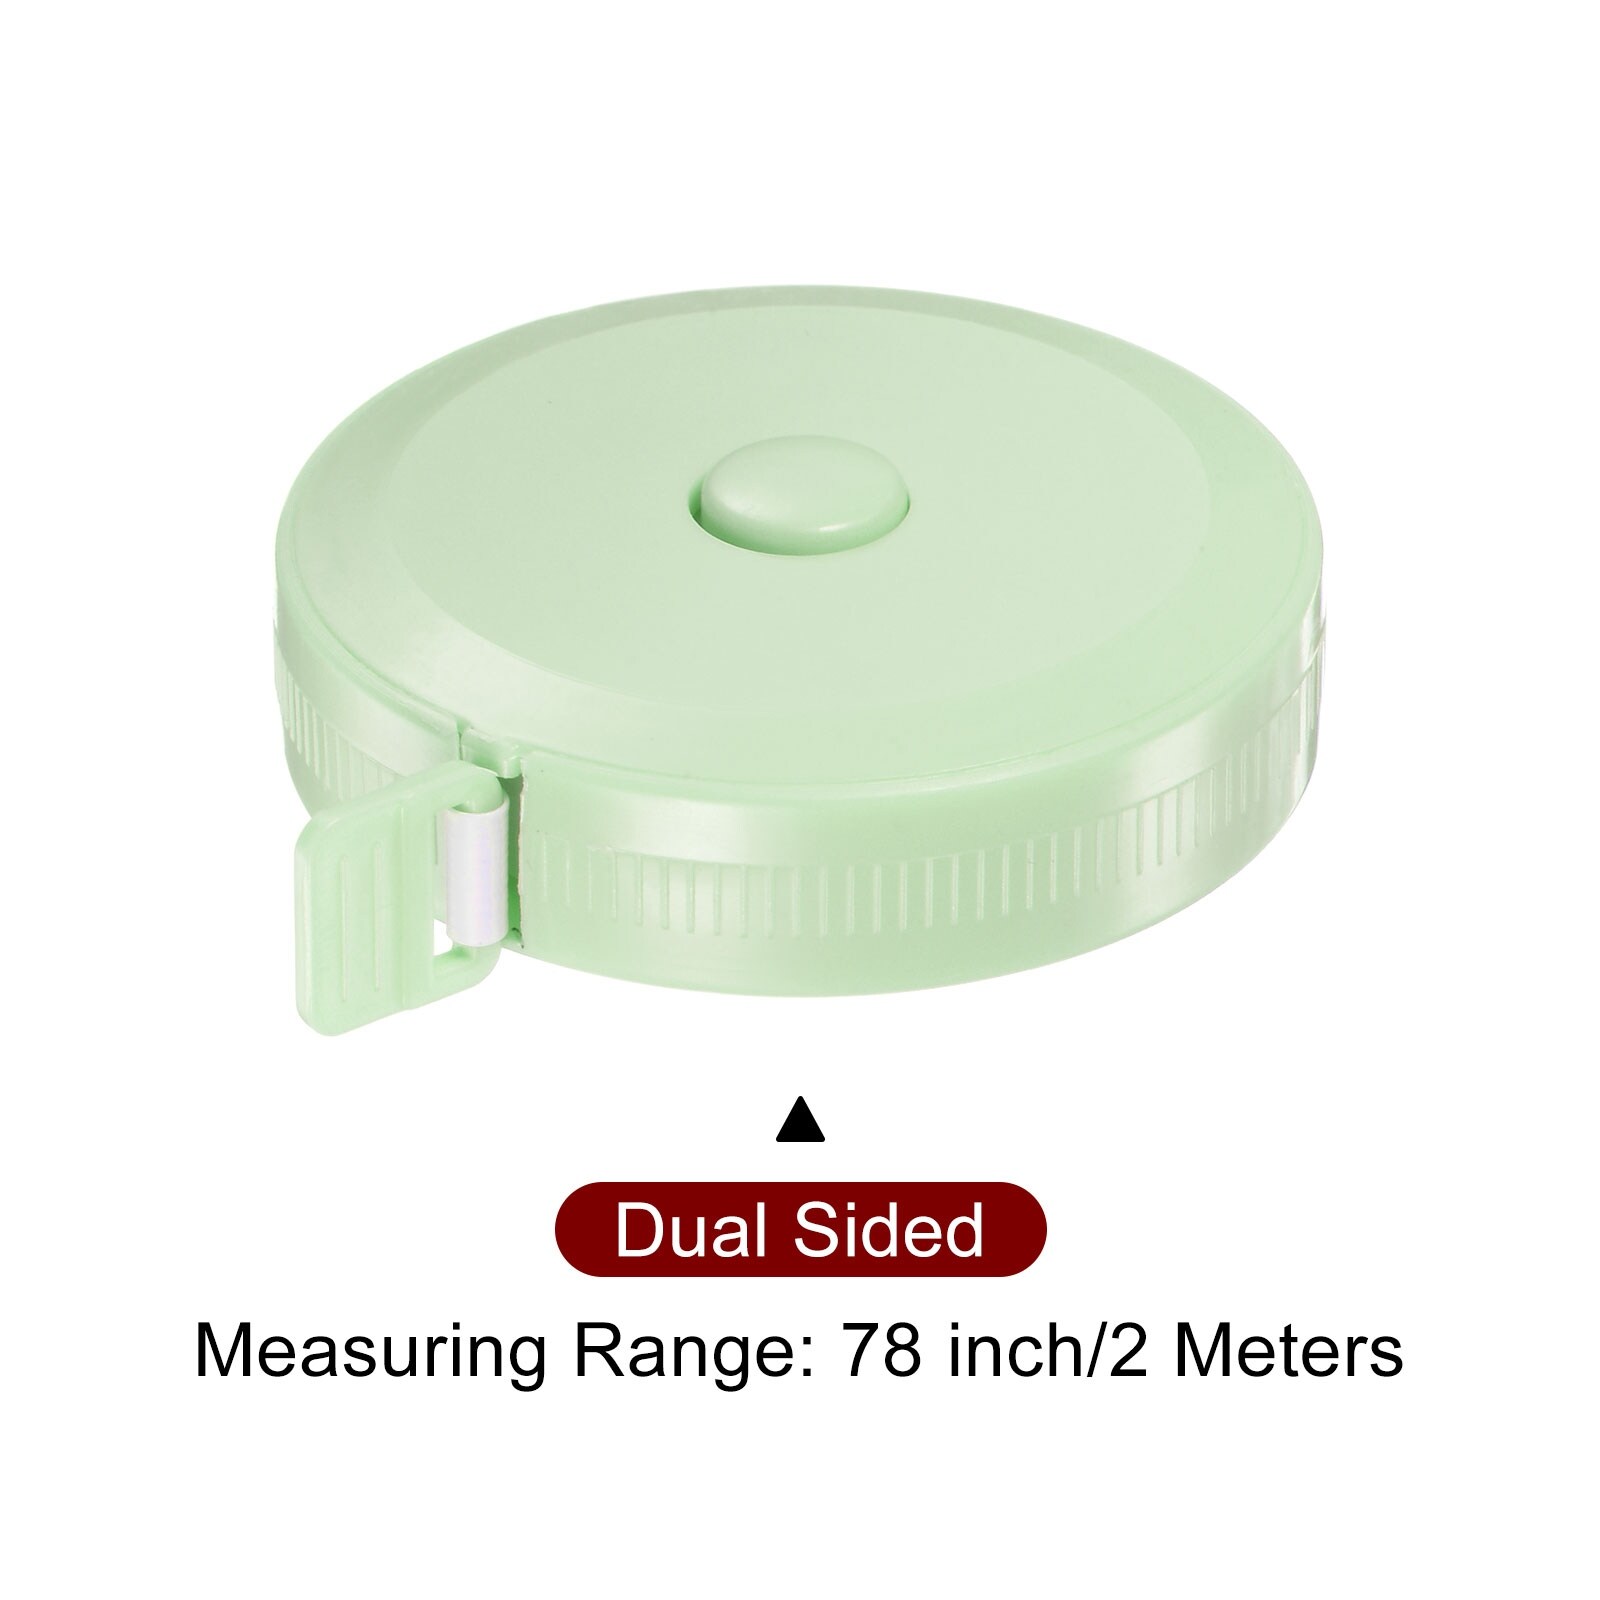 Measuring Tape 2M/78-inch Round Retractable Tailors Tape Measure, Green -  Bed Bath & Beyond - 36506010